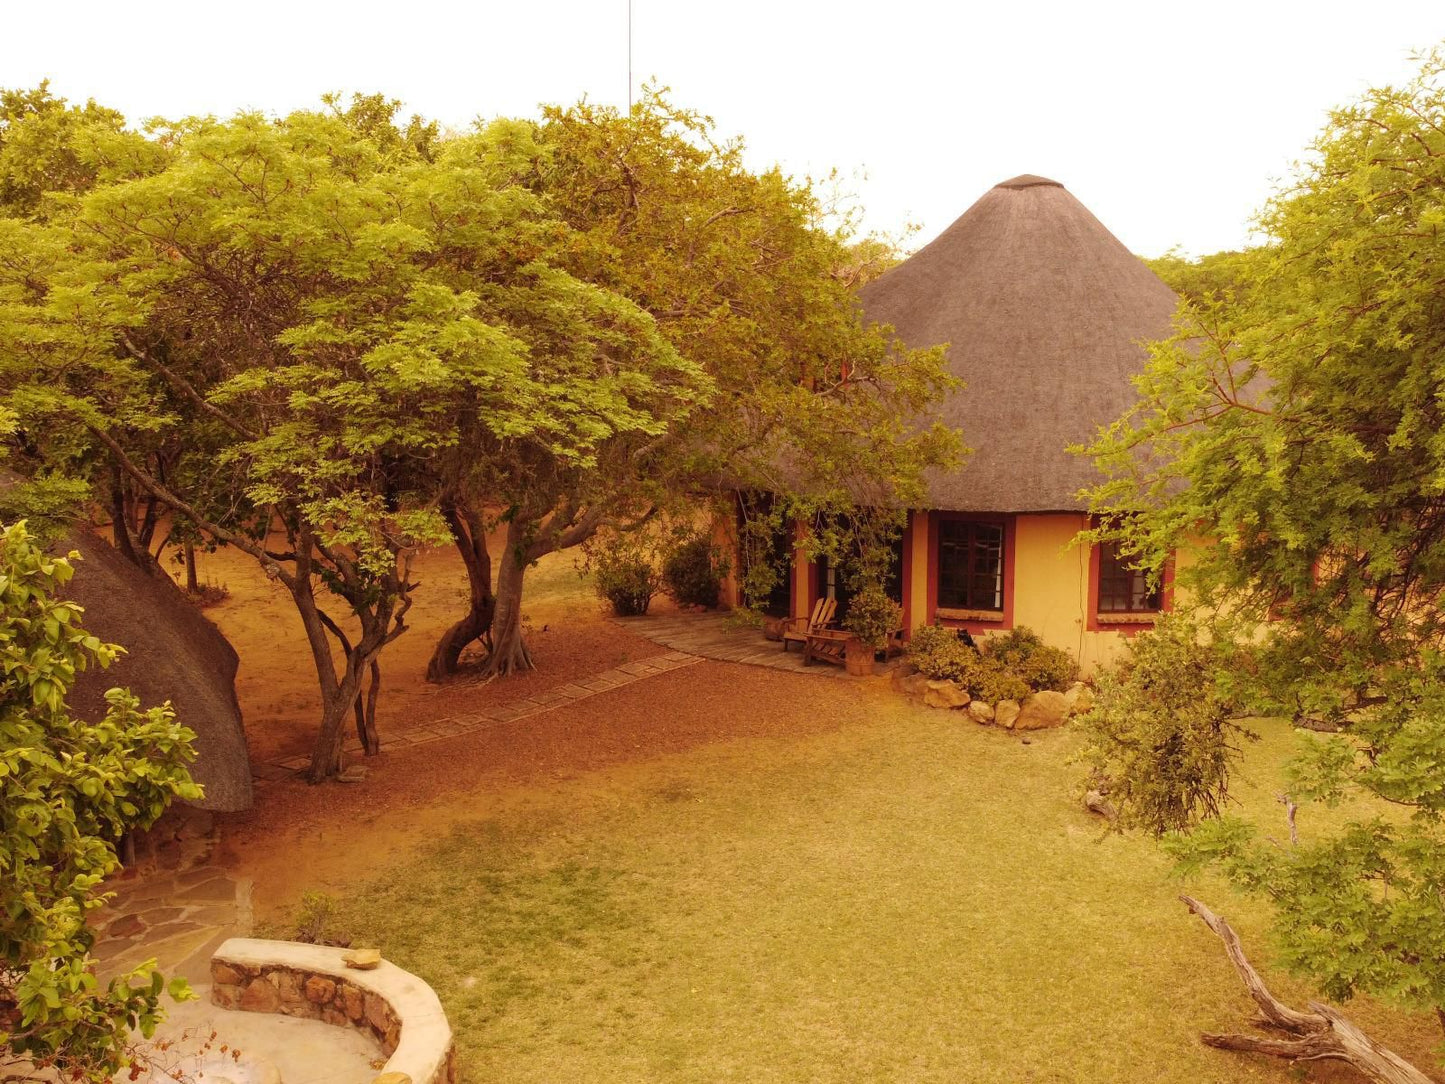 Izintaba Private Game Reserve Vaalwater Limpopo Province South Africa Building, Architecture